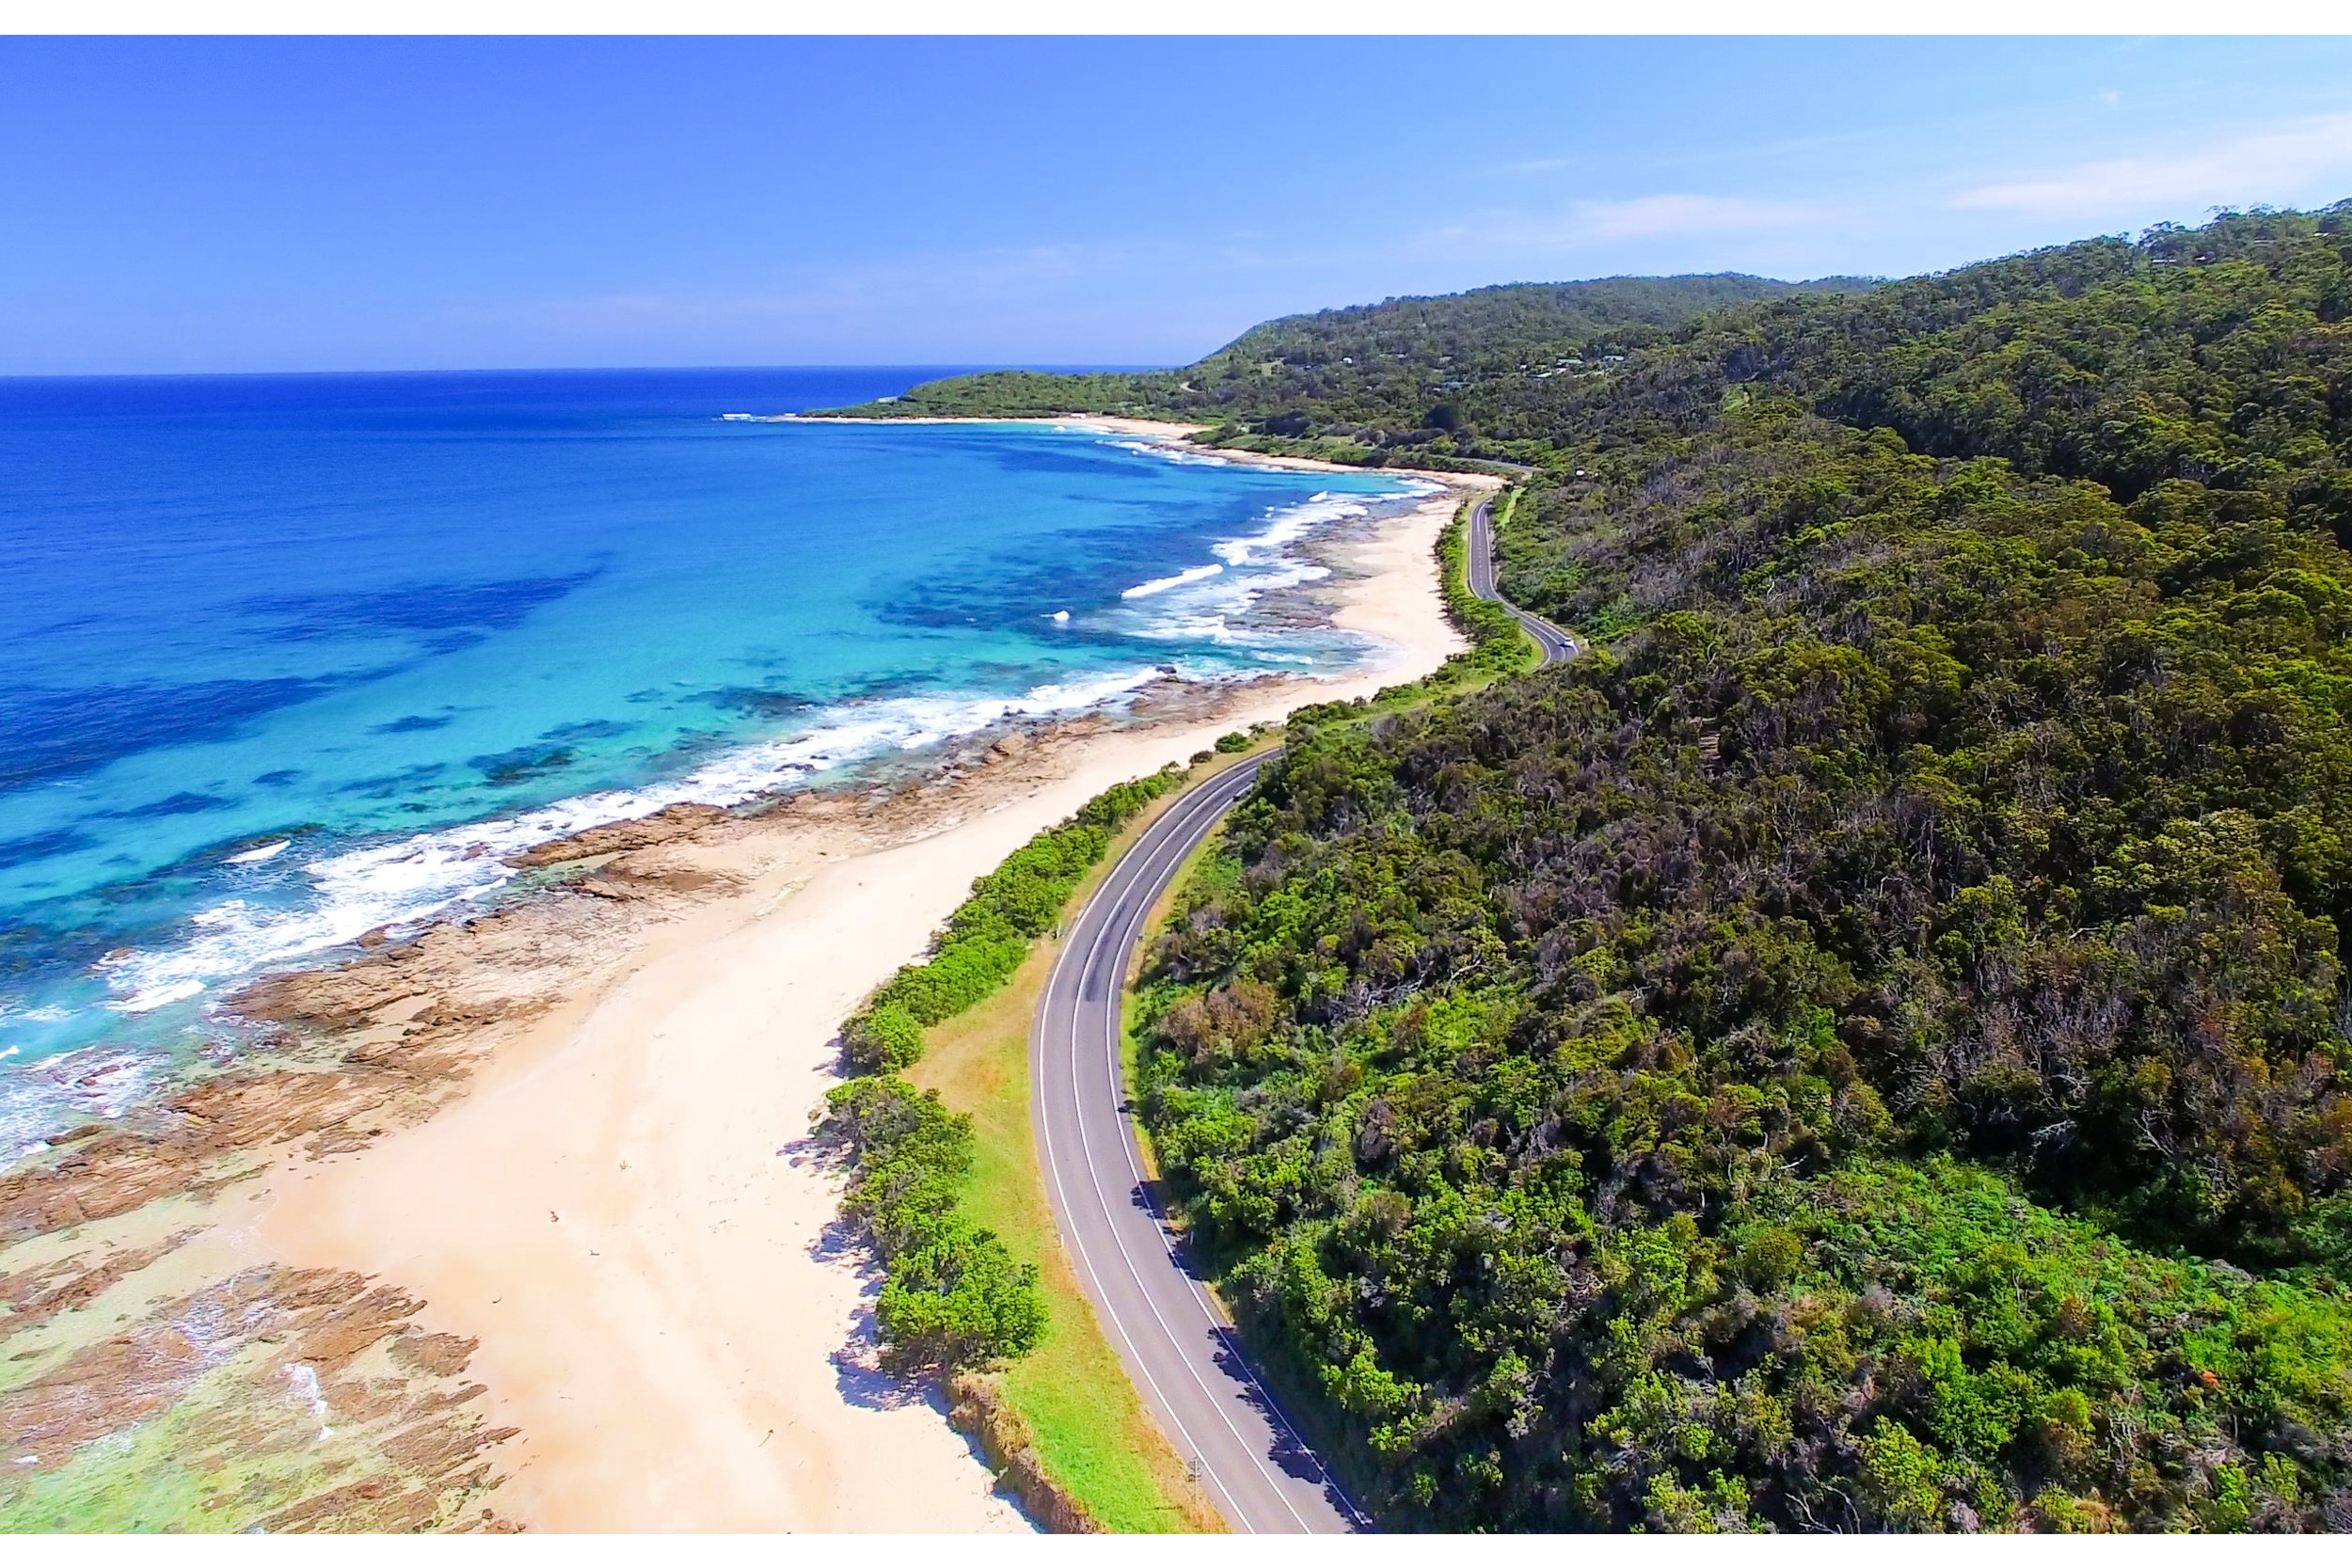 Looking down on a coastal winding road on a perfect blue-sky day. To the left of the road, pristine white sand stretches into calm, turquoise waters. On the right, dense forest lines the hillsides